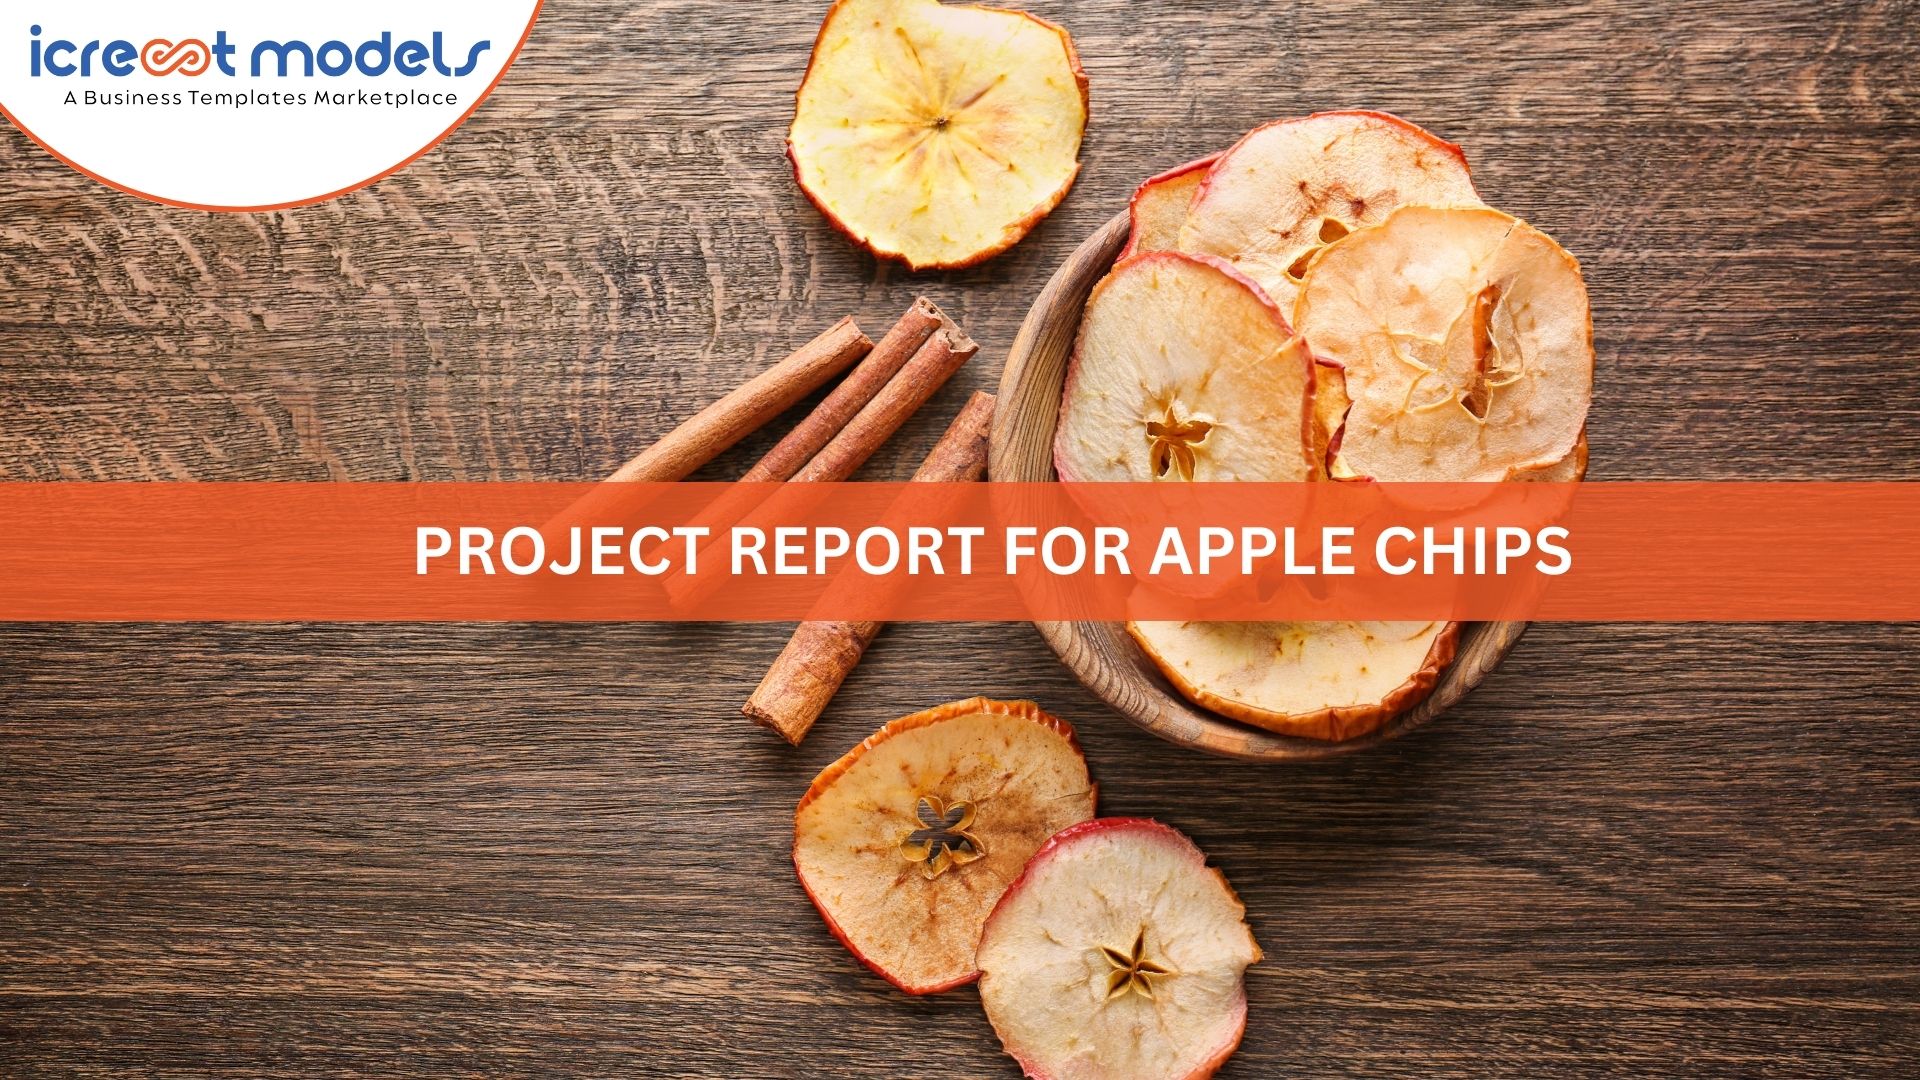 PROJECT REPORT FOR APPLE CHIPS